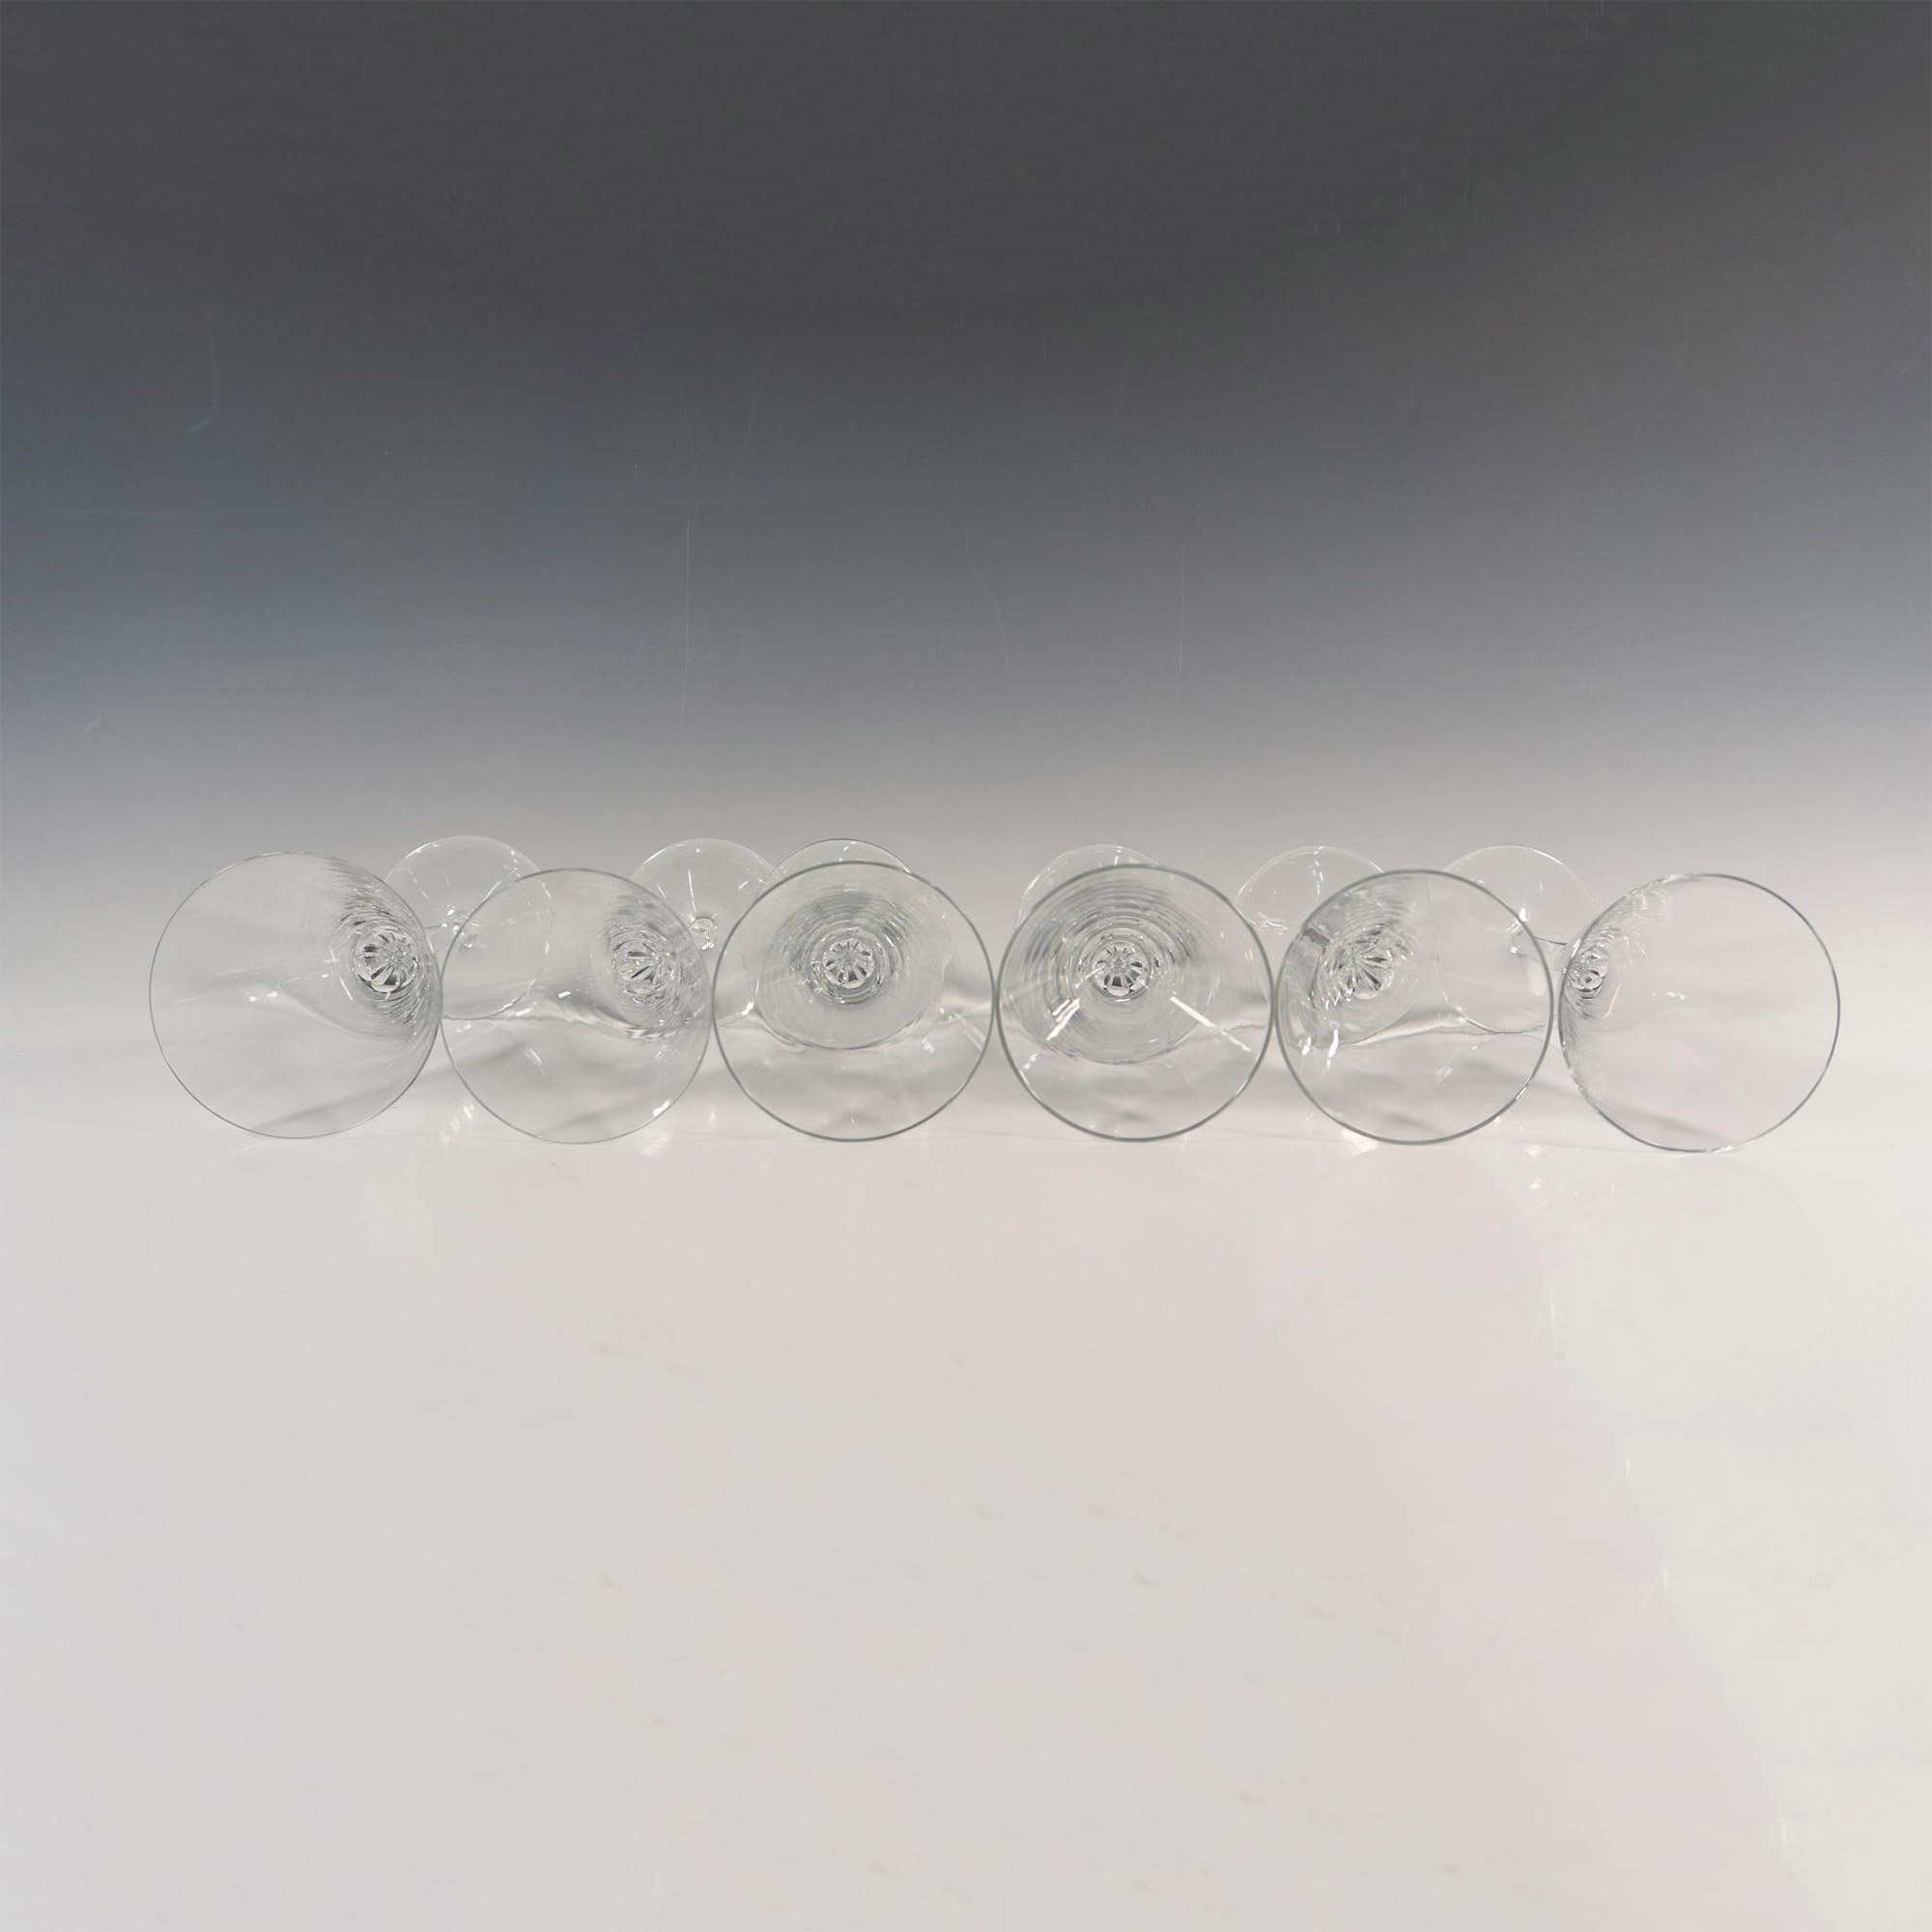 6pc Baccarat Wine Glasses - Image 3 of 3